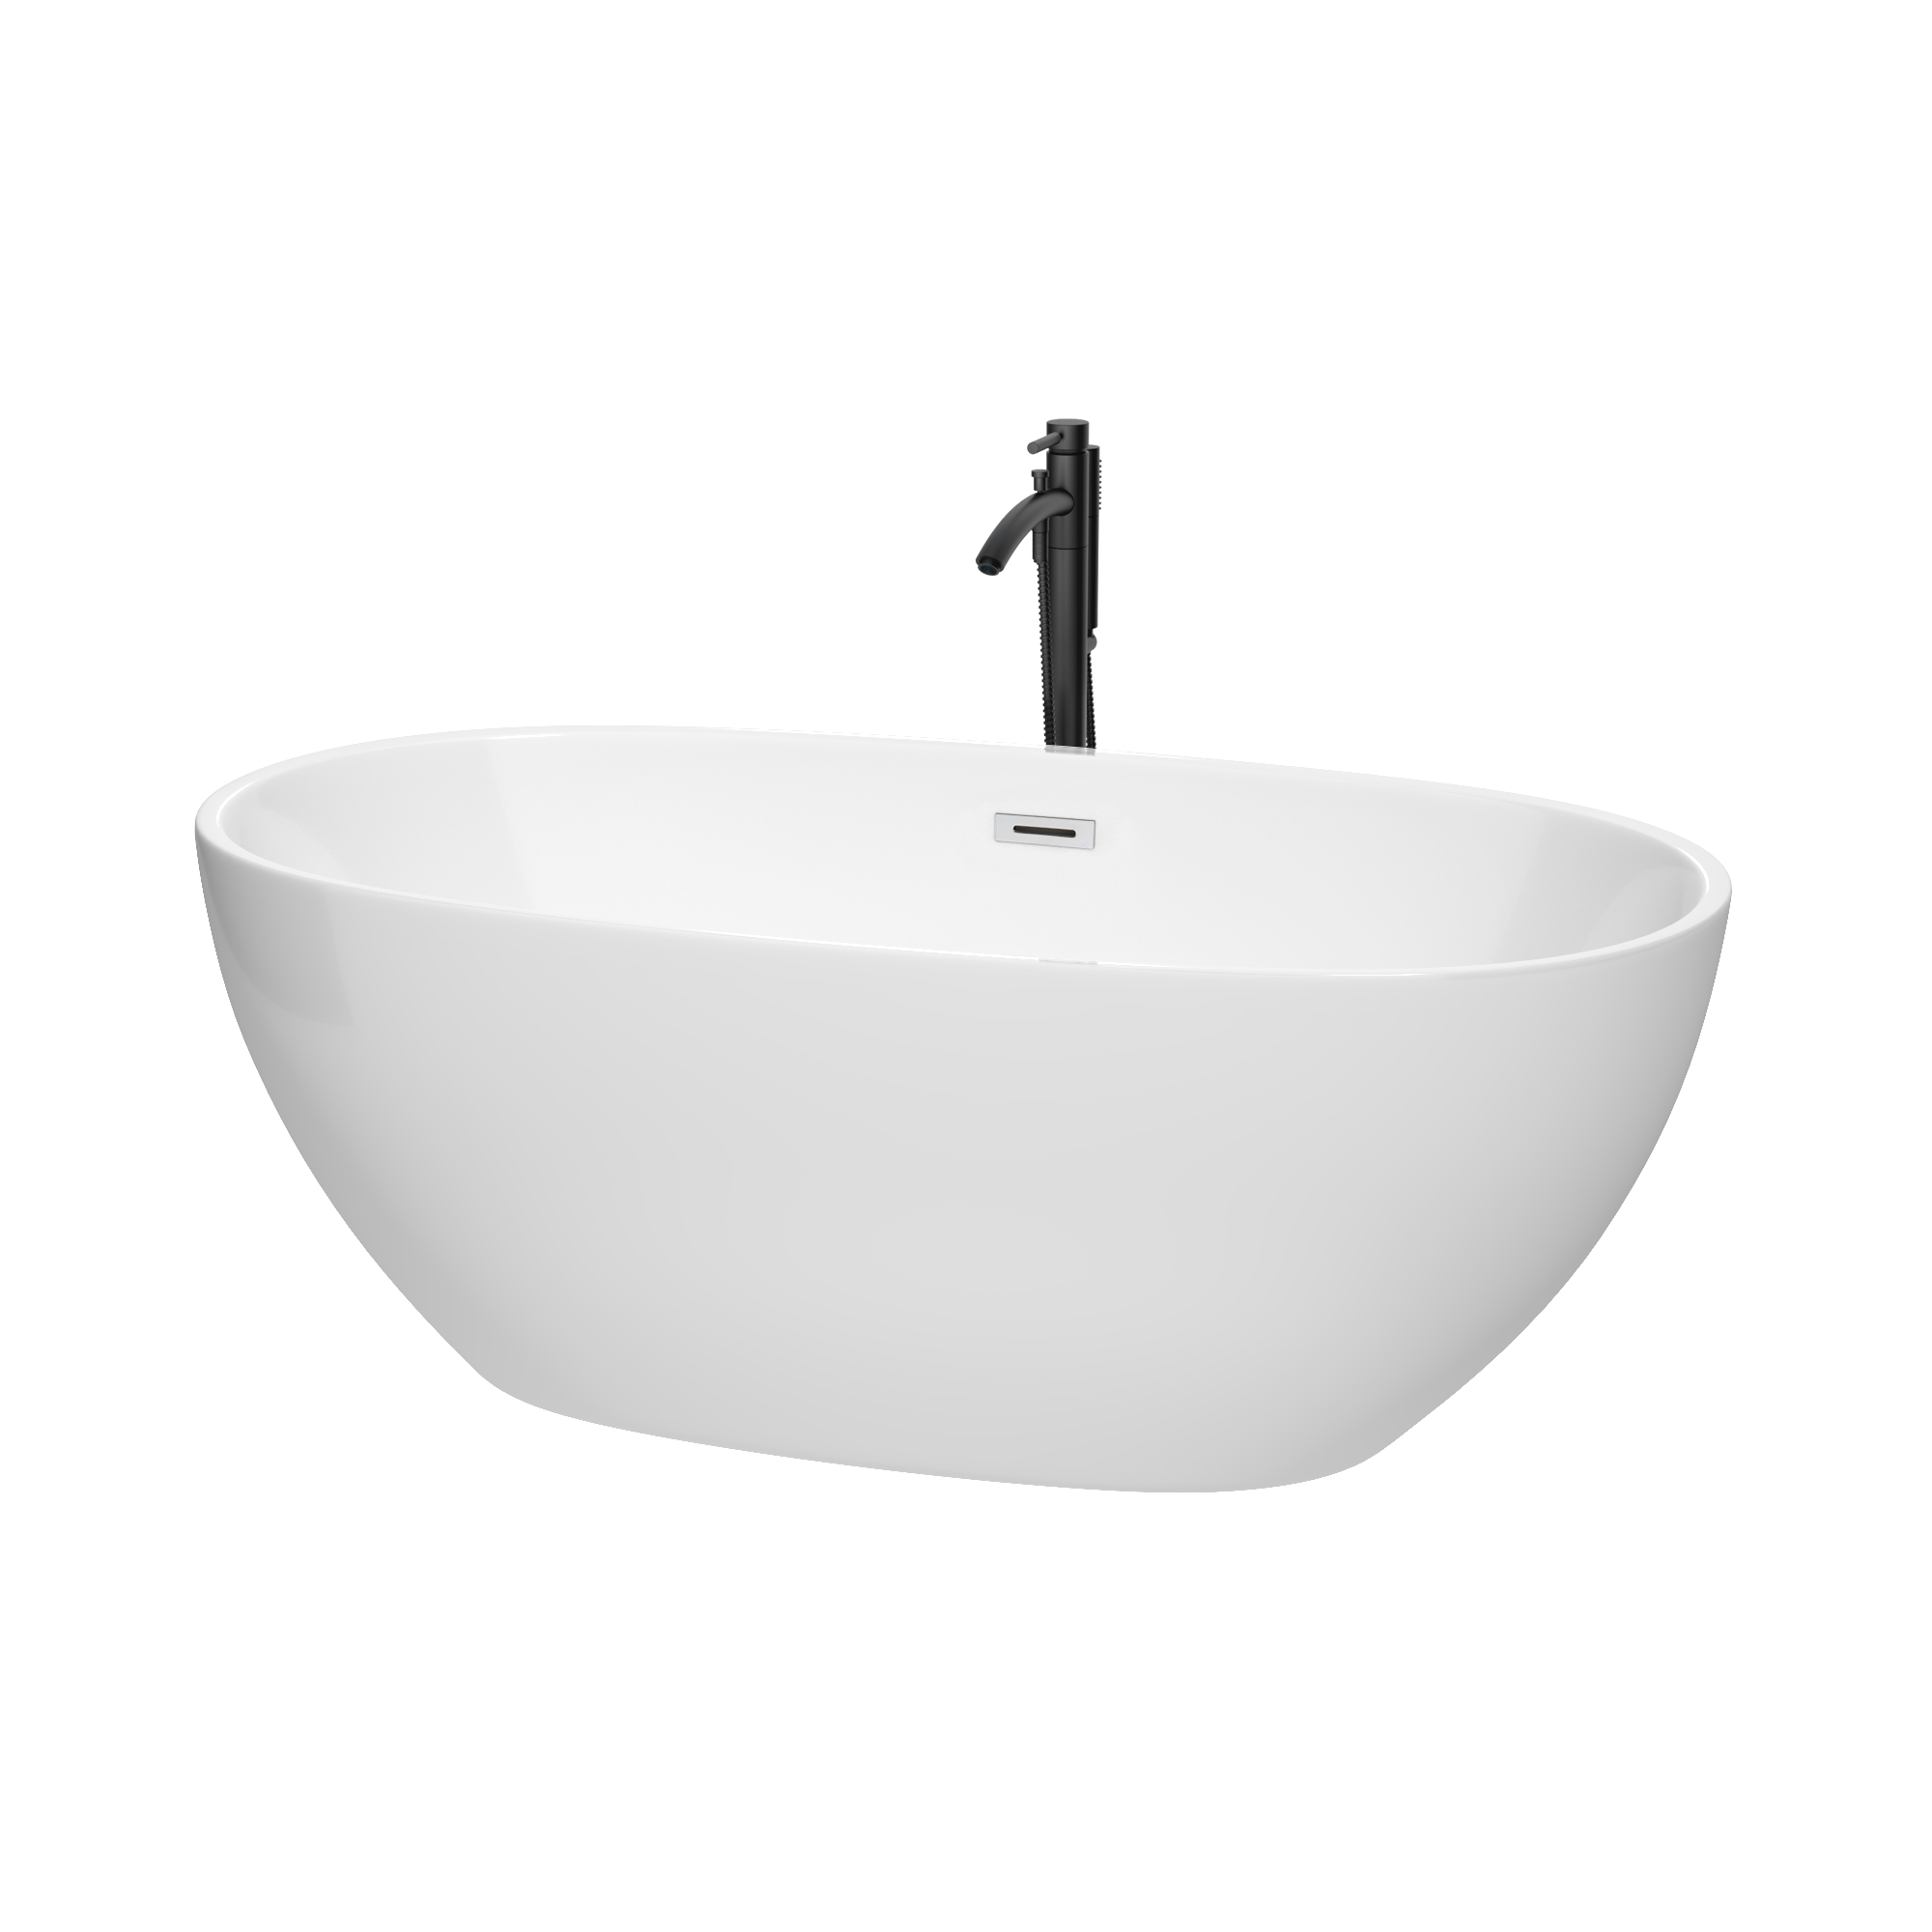 63" Freestanding Bathtub in White with Polished Chrome Trim and Floor Mounted Faucet in Matte Black Finish